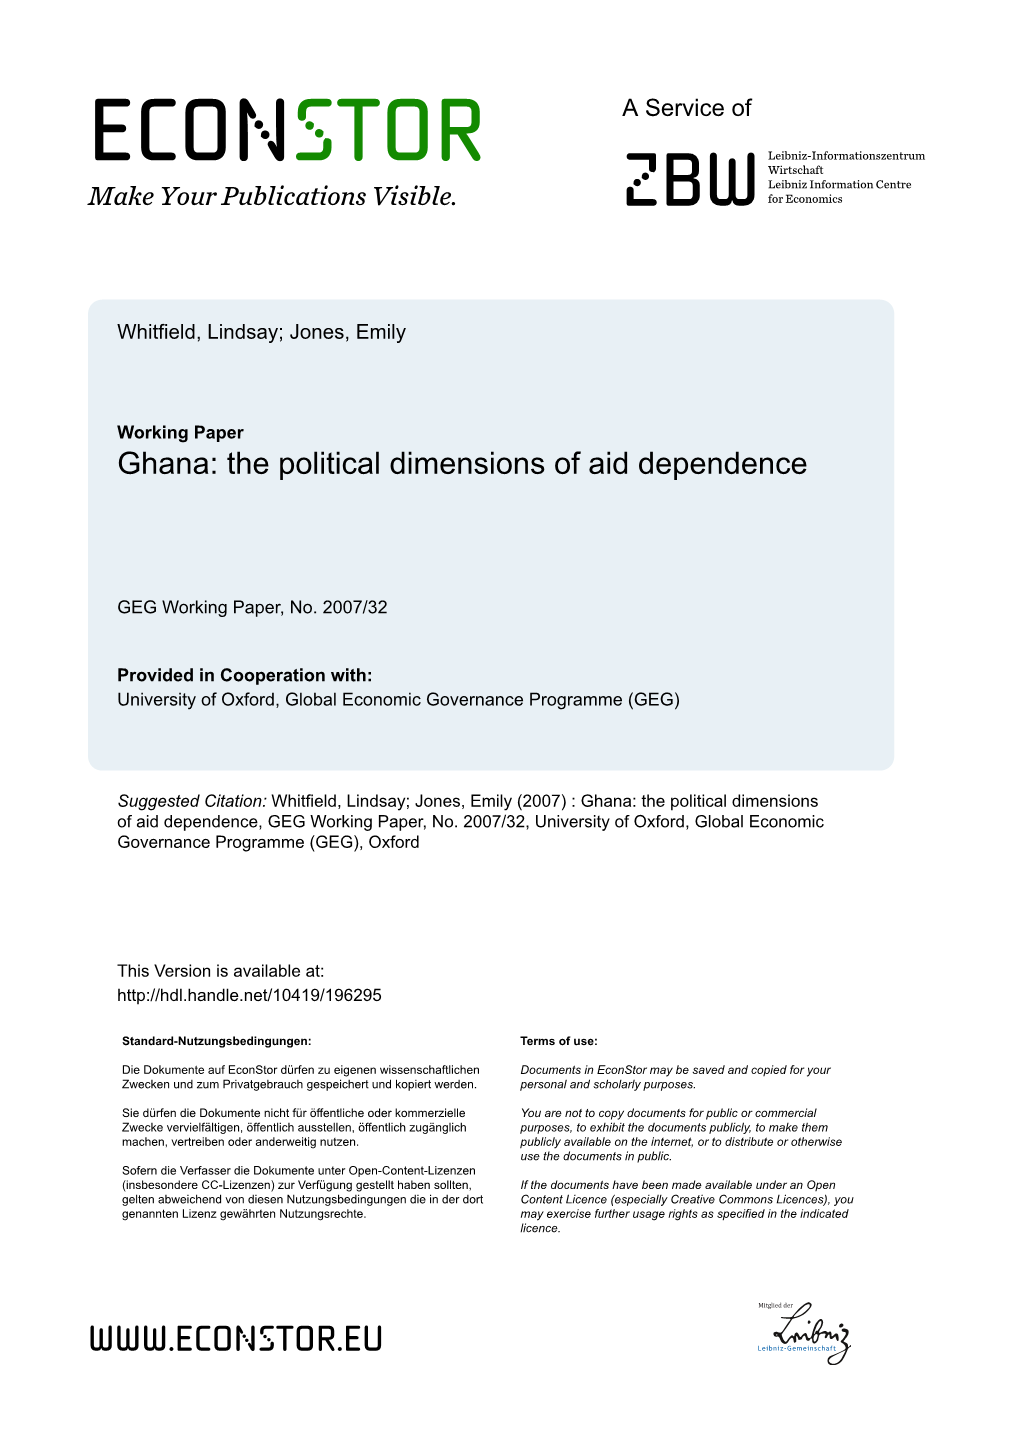 Ghana: the Political Dimensions of Aid Dependence